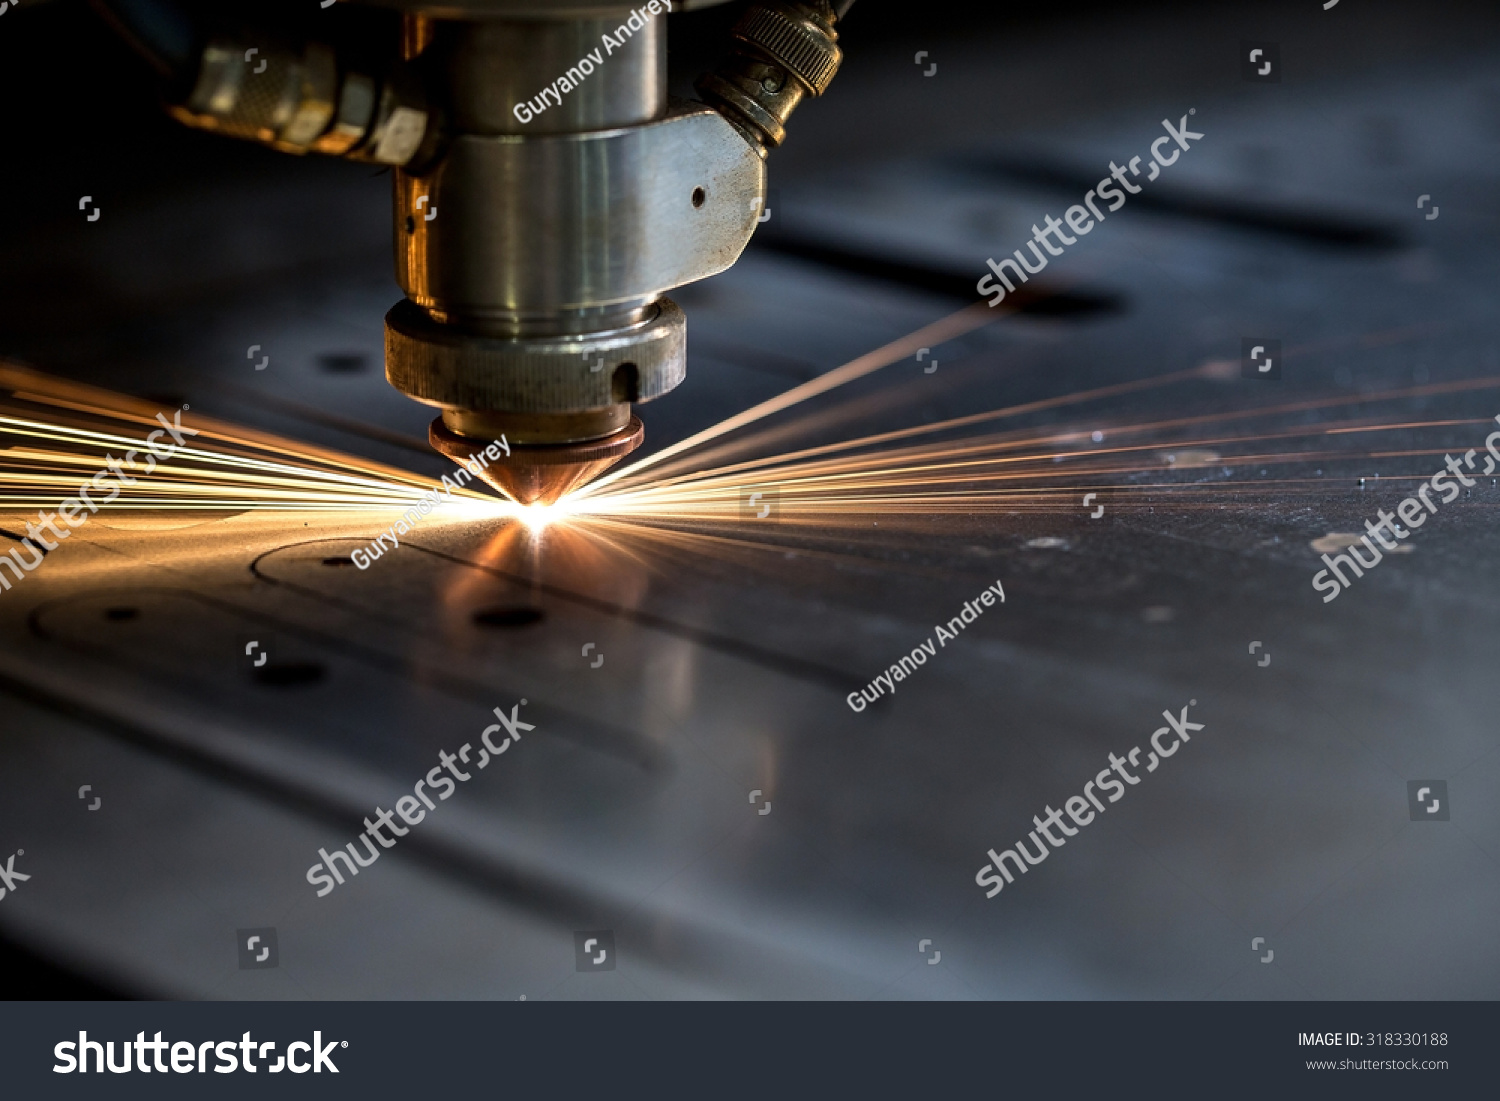 Cutting of metal. Sparks fly from laser #318330188